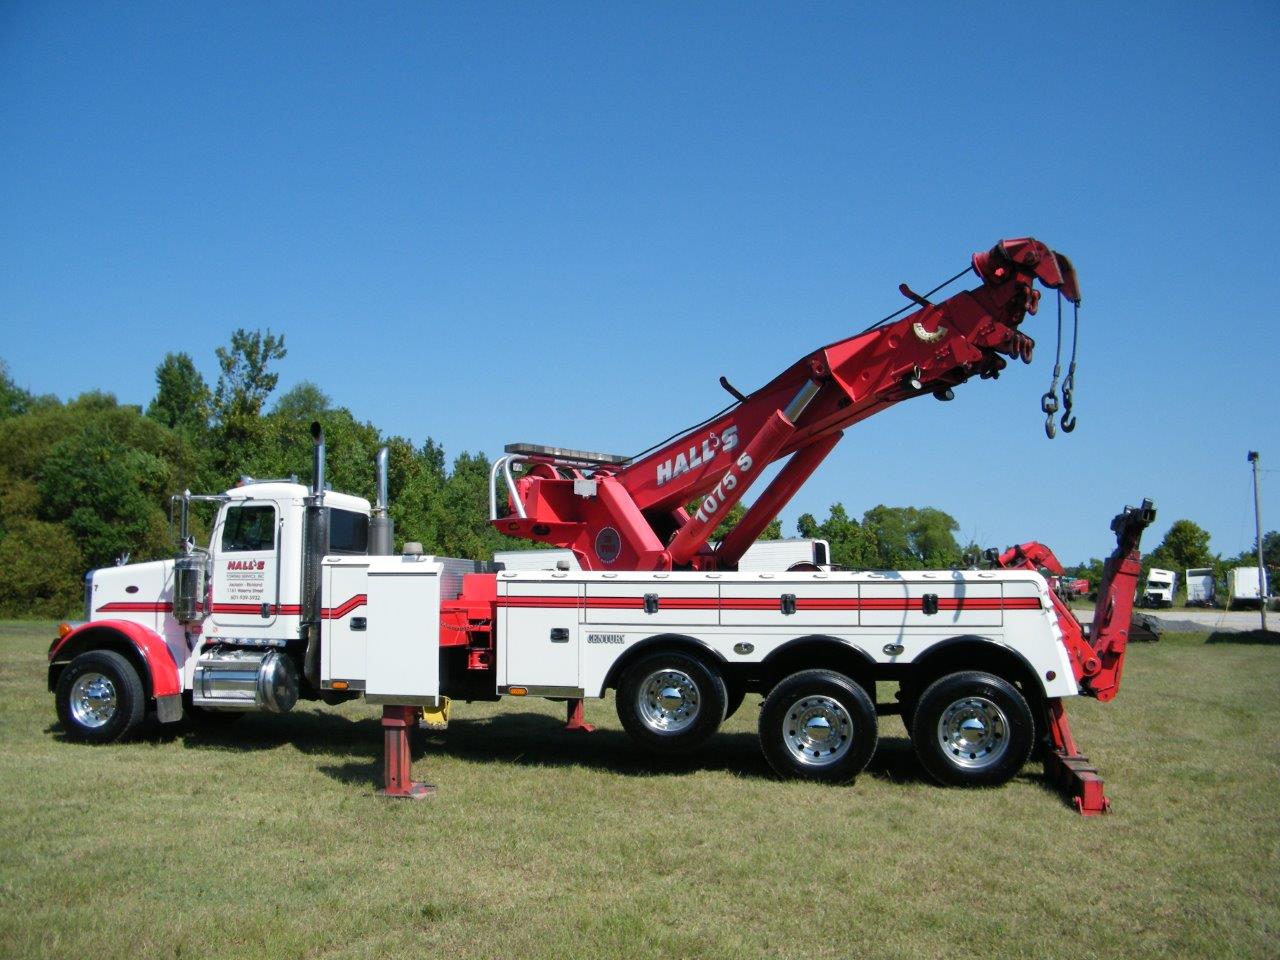 Hall’s Towing Service is a full service 24/7 towing company in Jackson, MS committed to providing the most comprehensive services for all your towing and recovery needs. Its starts with an experienced and friendly staff of customer representative.

Because many of our service calls occur during the most stressful situation, our team can quickly dispatch a vehicle to arrive at the scene. They can also take the time to address any of your questions or concerns about our towing and recovery services.

The team at Hall’s Towing Service understands that time is of the essence. Each job is handled with high priority to ensure our customers can get back on the road or can be directed to the nearest vehicle repair facility.

We Tow Any Vehicle - Anywhere

Nobody likes to hear the word “no”. Here at Hall’s Towing Service, our team goes the extra mile to meet all of your towing needs. Whether it’s heavy-duty towing in Jackson or long distance towing, there are no limits on our towing and recovery services.

We take pride in our attention to detail. This means moving vehicles as quickly and safely as possible. We have a complete fleet of trucks capable of moving vehicles regardless of size. When it comes time for an emergency job, you only want a towing service with a proven track record of looking out for the best interest of each customer. Turn to our team for the best 24/7 towing and recovery in Mississippi, call Hall’s Towing Service today.

24/7 Emergency Dispatch: (601) 939-3932

To provide the best quality of towing and recovery service in Jackson, it takes a team of dedicated professionals from the management team to customer service along with our skilled drivers and technicians. Our staff is qualified to do any job you might need! Contact us to find out what Hall's can offer you.

What really separates Hall’s Towing Service from the competition is our wide variety of towing services.

Our team can provide the following services:

•	24/7 towing and recovery
•	Long distance towing
•	Light, medium and heavy-duty towing
•	Recovery services
•	Ability to haul heavy equipment from dozers to cranes

 For Towing with no Limits, Call or Click hallstowing.com Today! (601) 939-3932